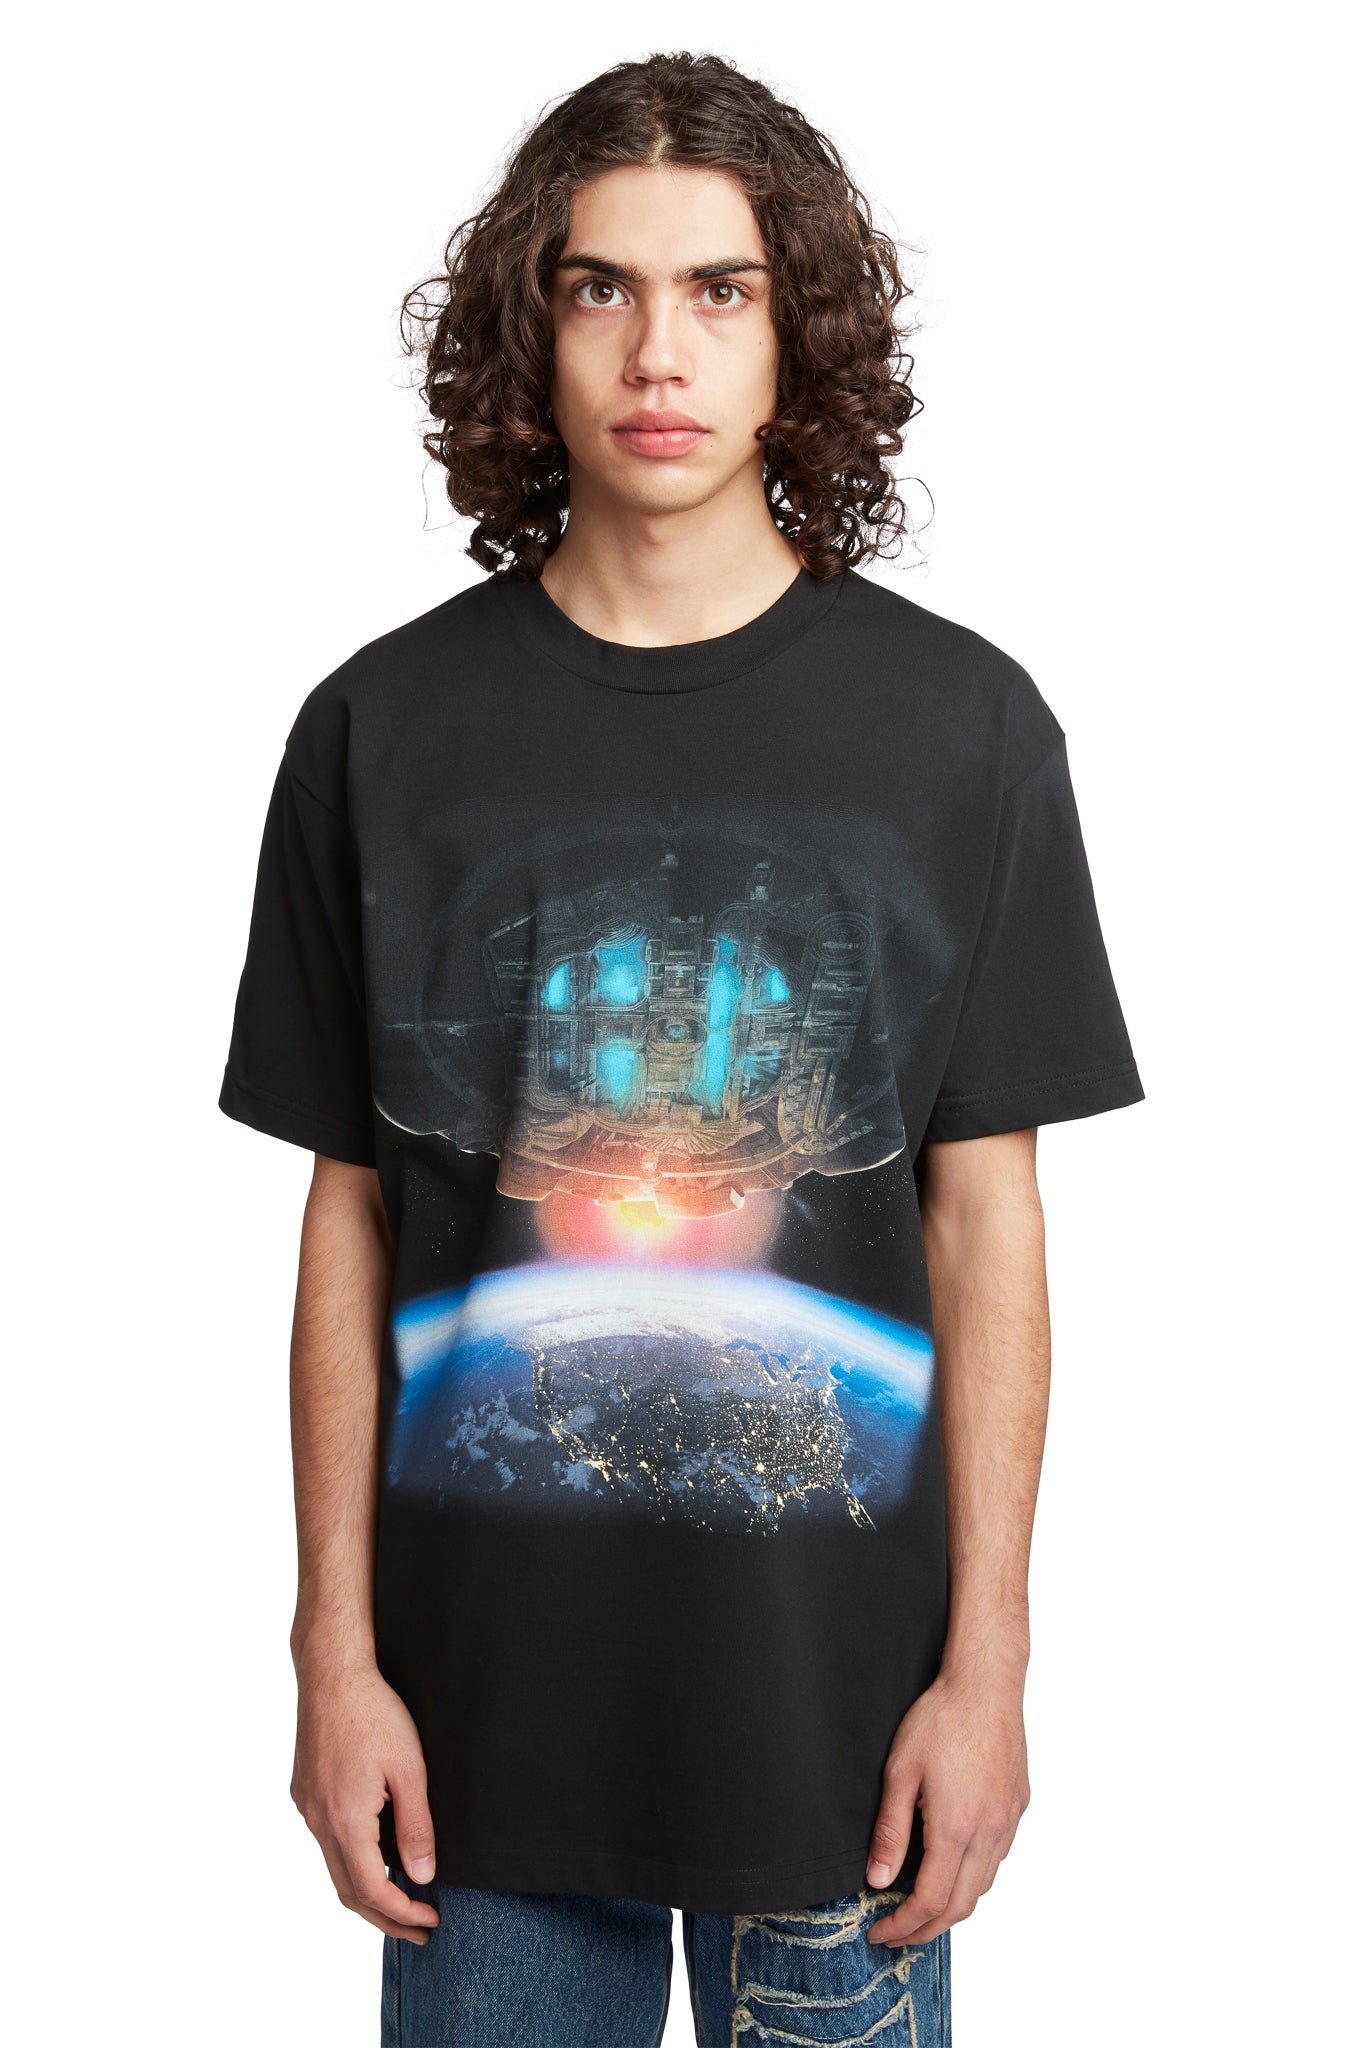 INVASION T-SHIRT by MENACE